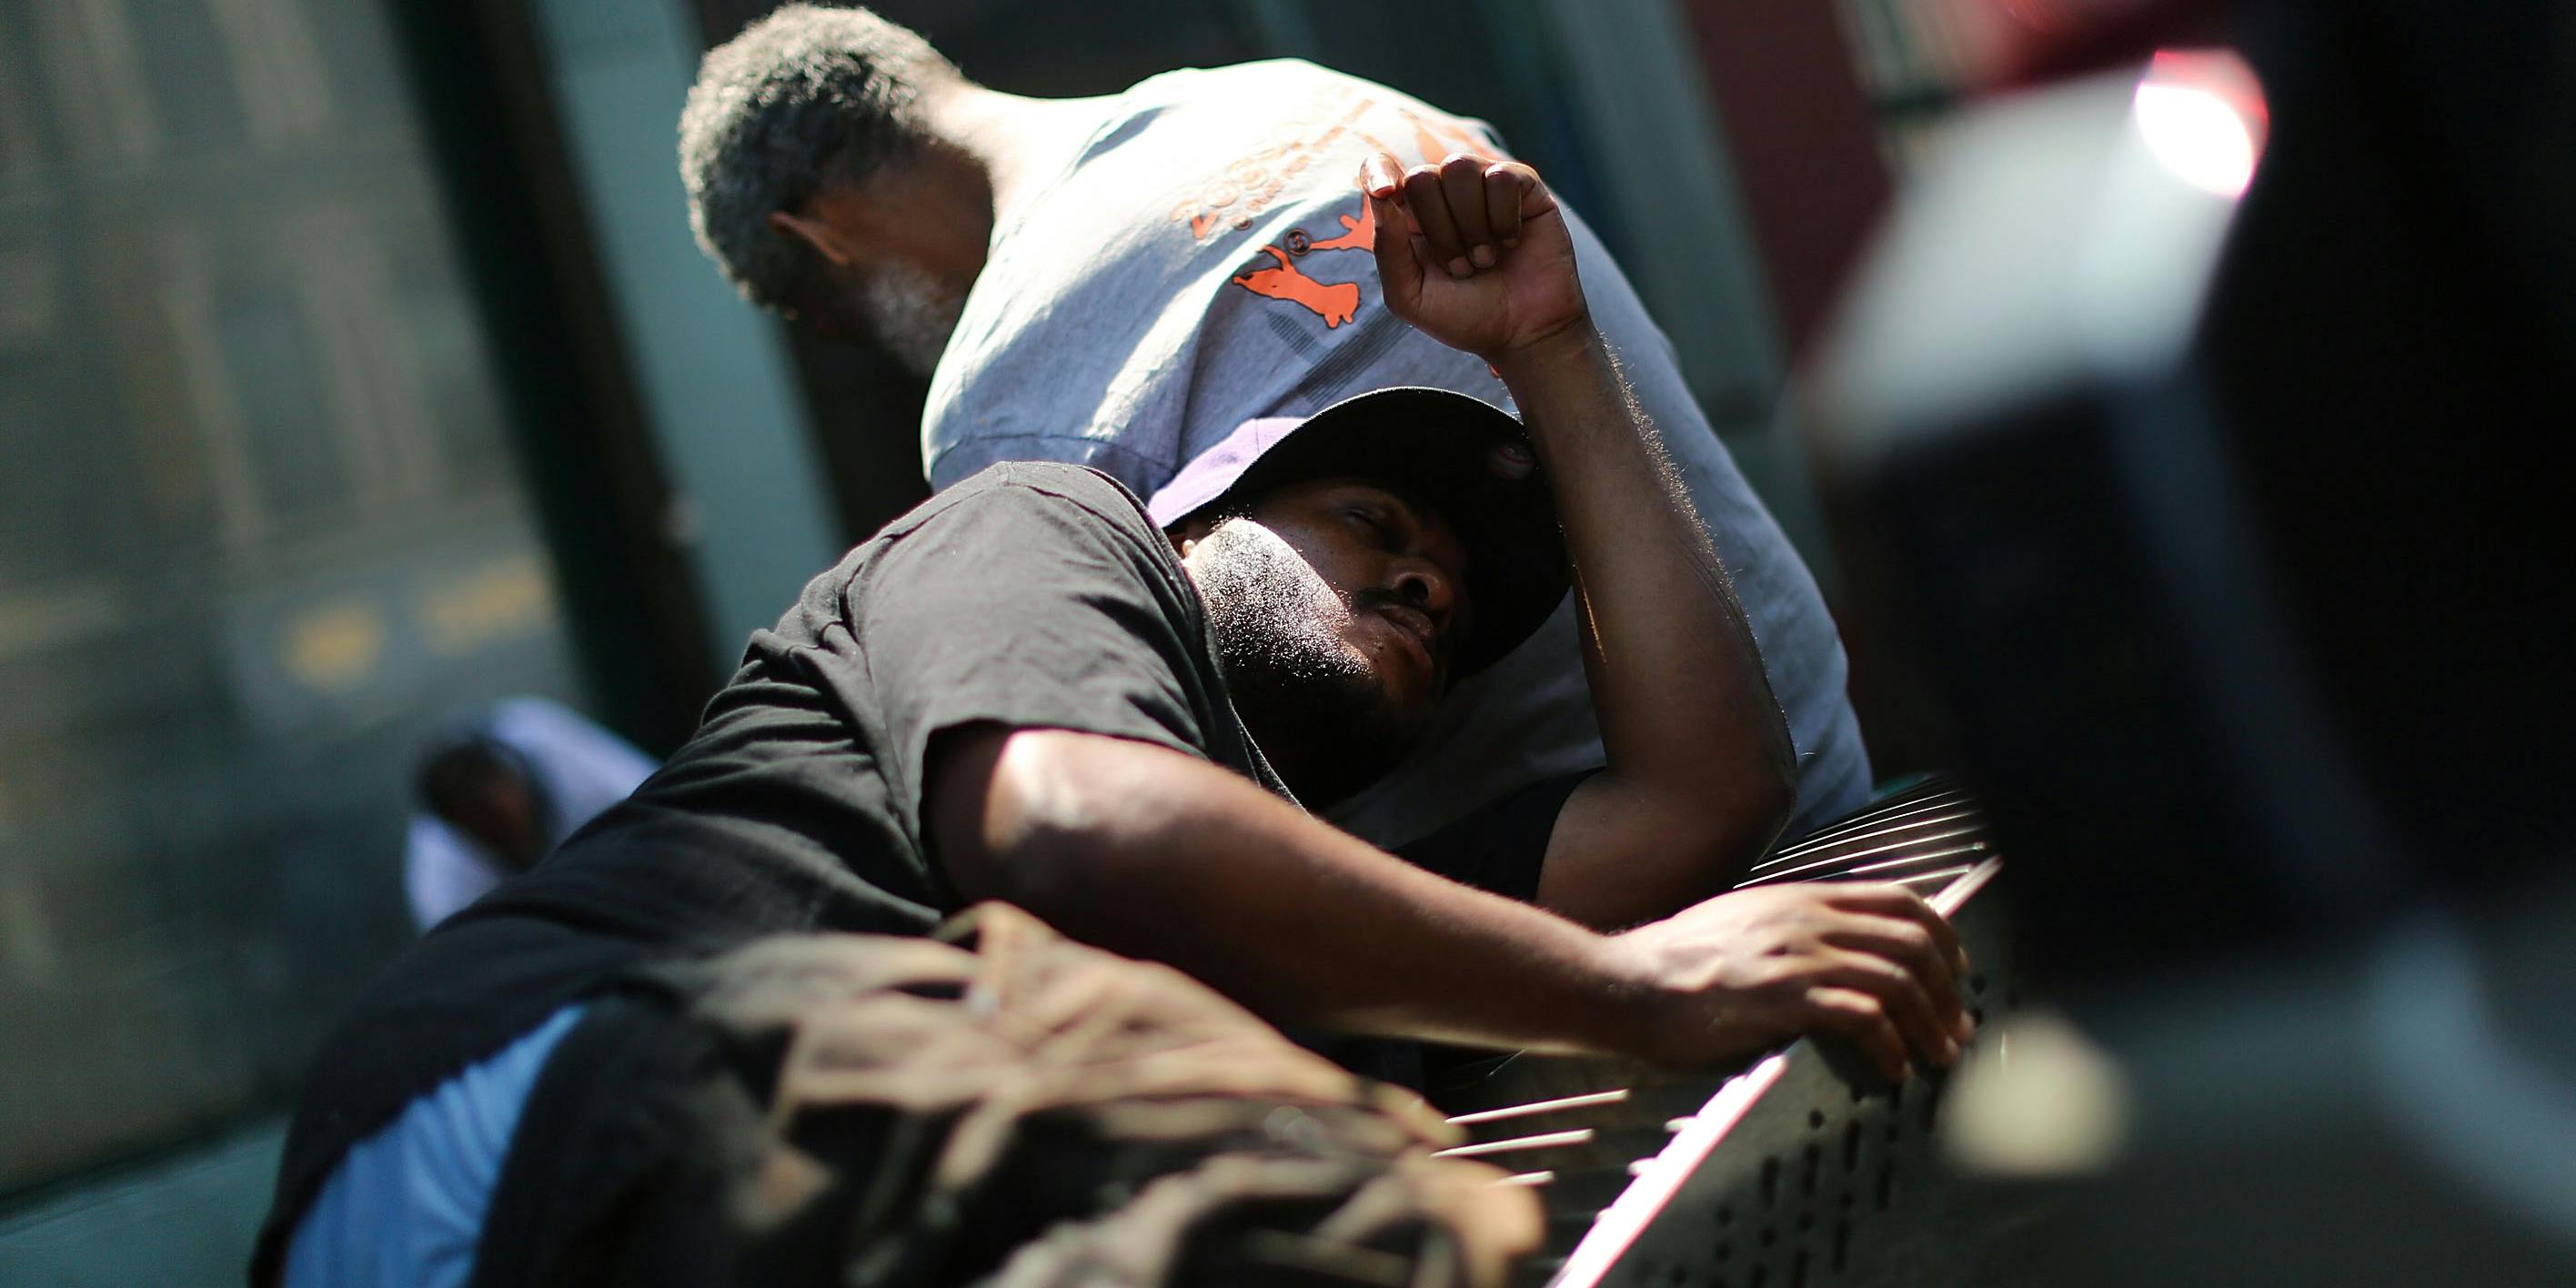 NEW YORK, NY - AUGUST 05: Men who are high on K2 or “Spice,” a synthetic cannabis drug, sleep along a street in East Harlem on August 5, 2015 in New York City. (Photo by Spencer Platt/Getty Images)